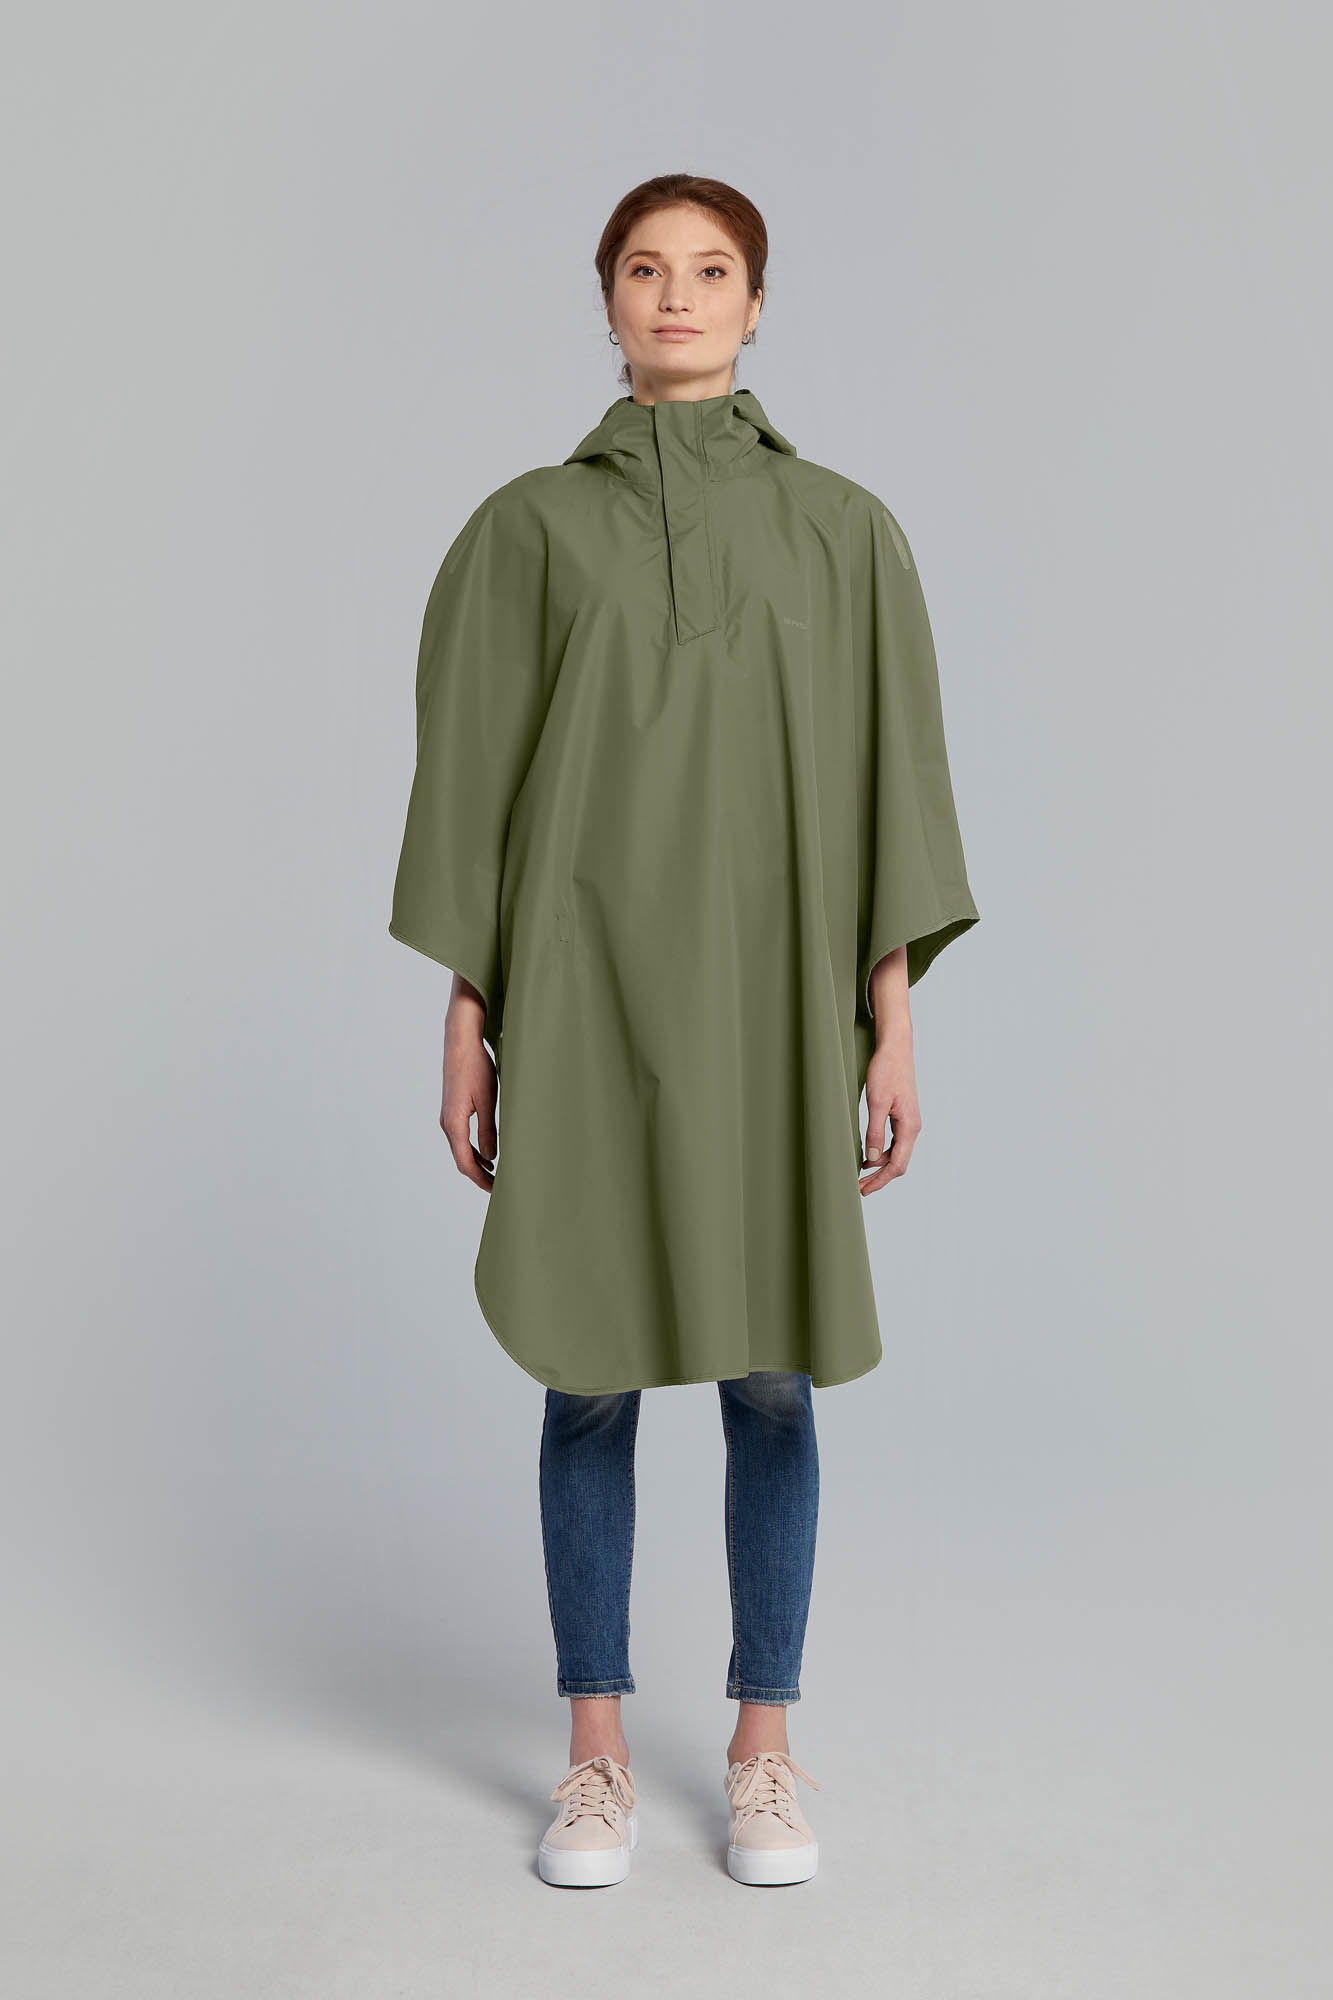 One Size Fits All-Unisex Waterproof Canvas Rain Poncho